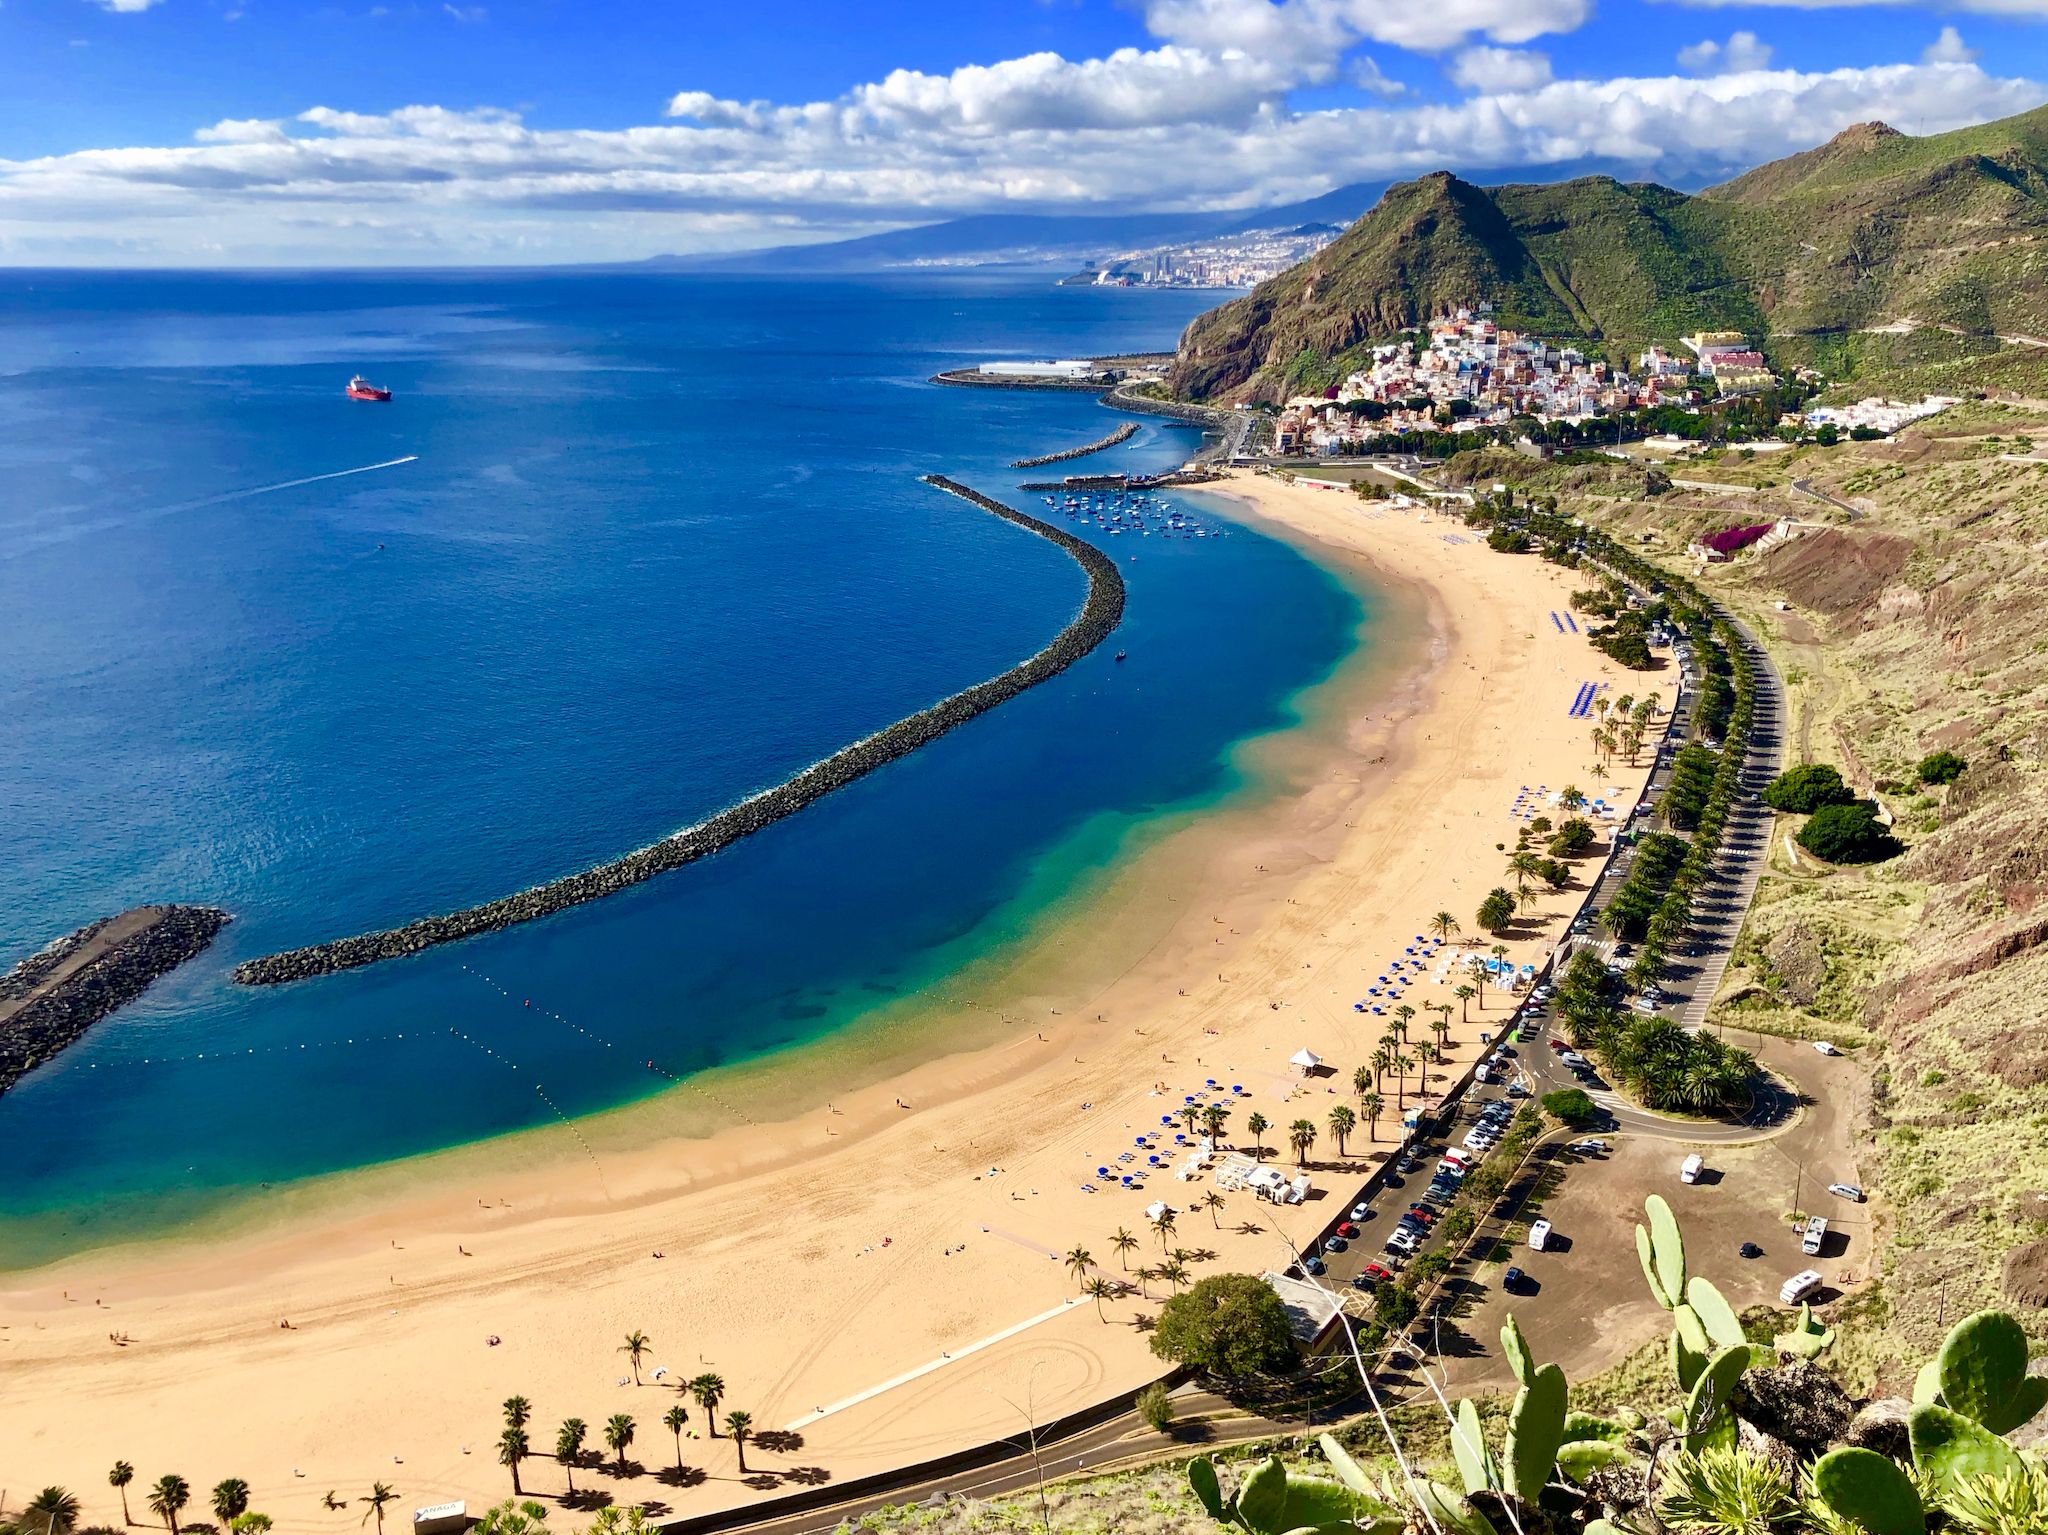 The beach Playa de las Teresitas is in our opinion the most beautiful in Tenerife - here you should plan a complete bathing day. Photo: Sascha Tegtmeyer